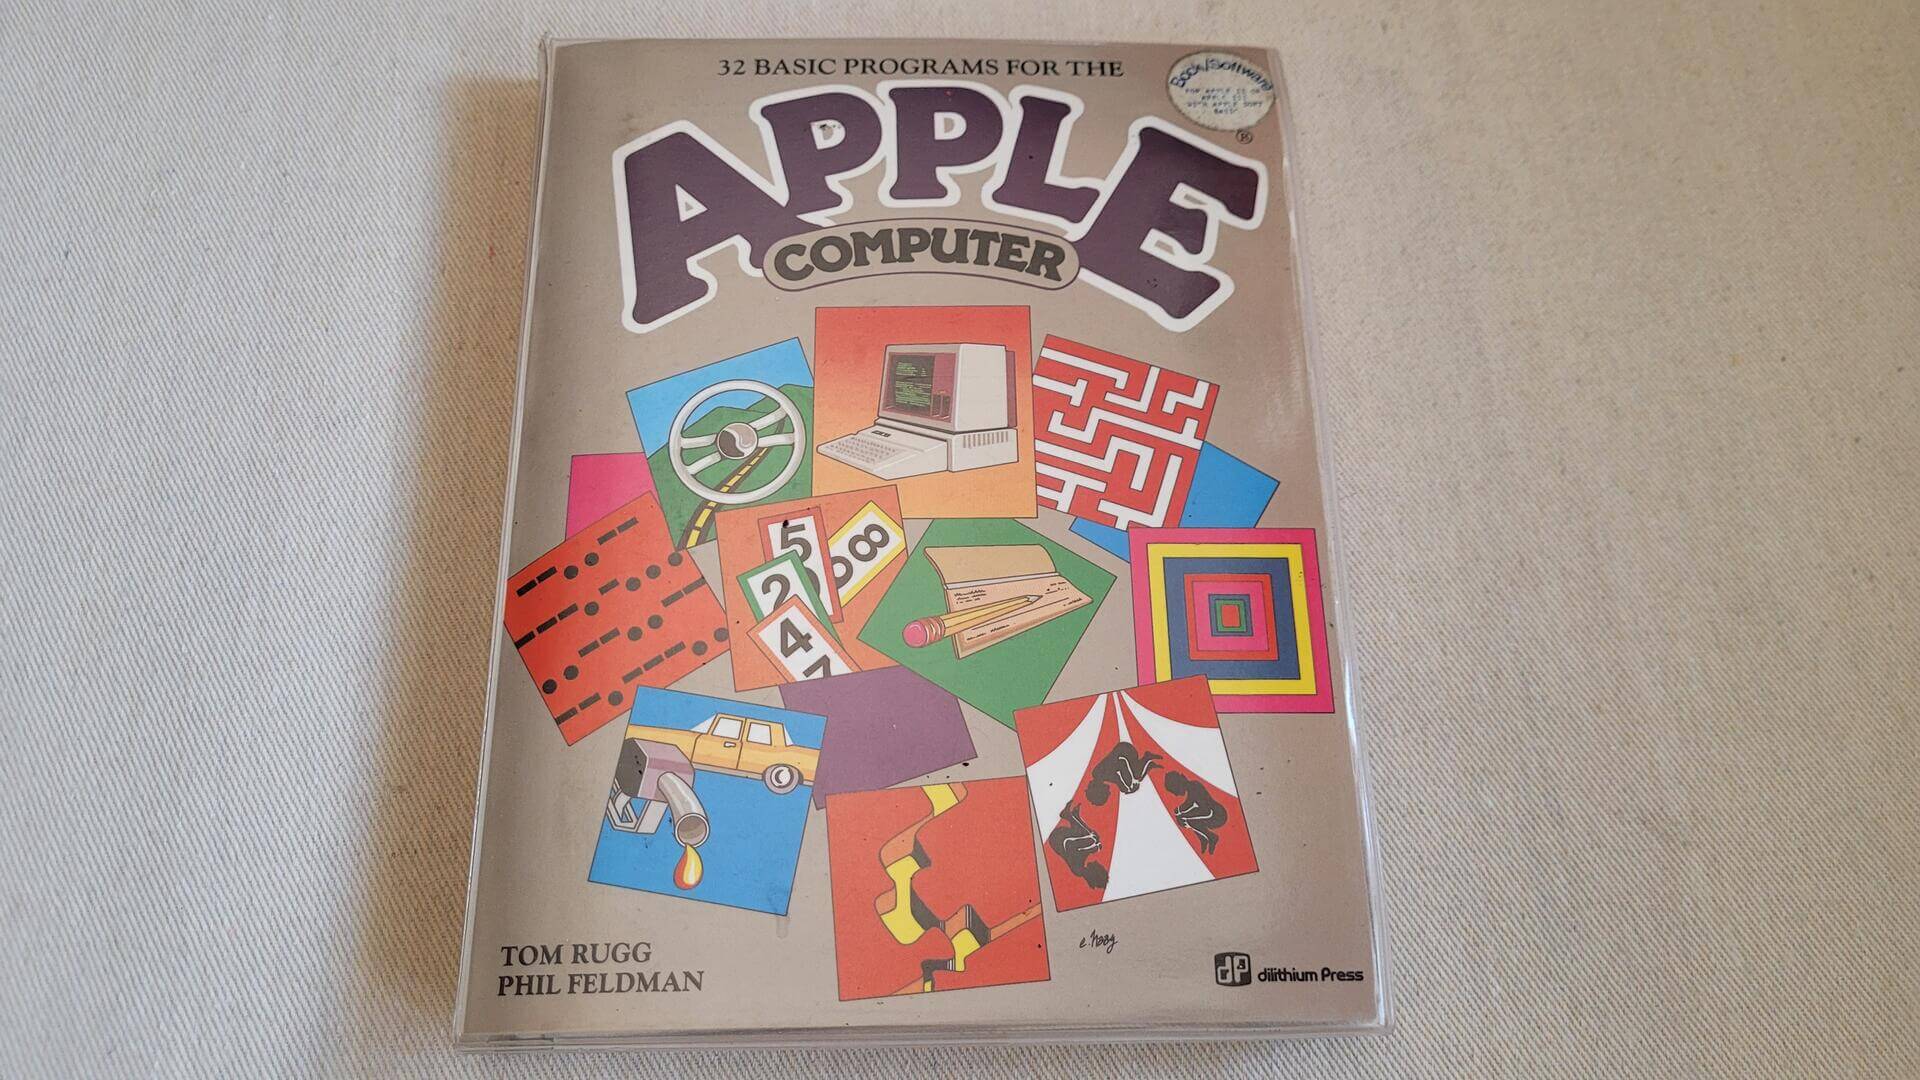 32 Basic programs for the Apple Computer, 1982 book by Tom Rugg and Phil Feldman and published by Dilithium Press. Rare vintage computer book with the sealed 5 1/4" disk that runs on Apple II, Apple IIe and Apple III computers and Applesoft Basic DOS 3.3 operating system